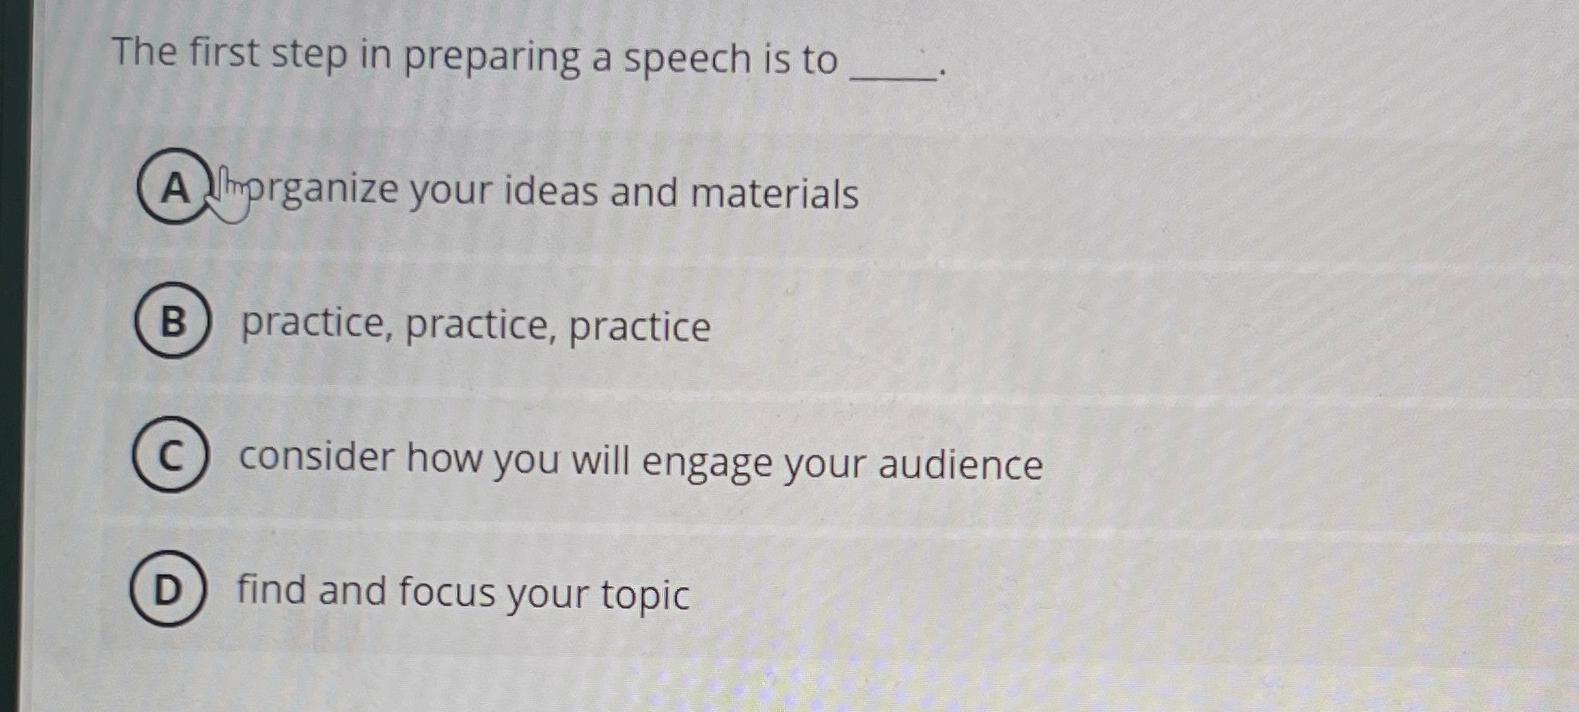 first step in preparing a speech is to